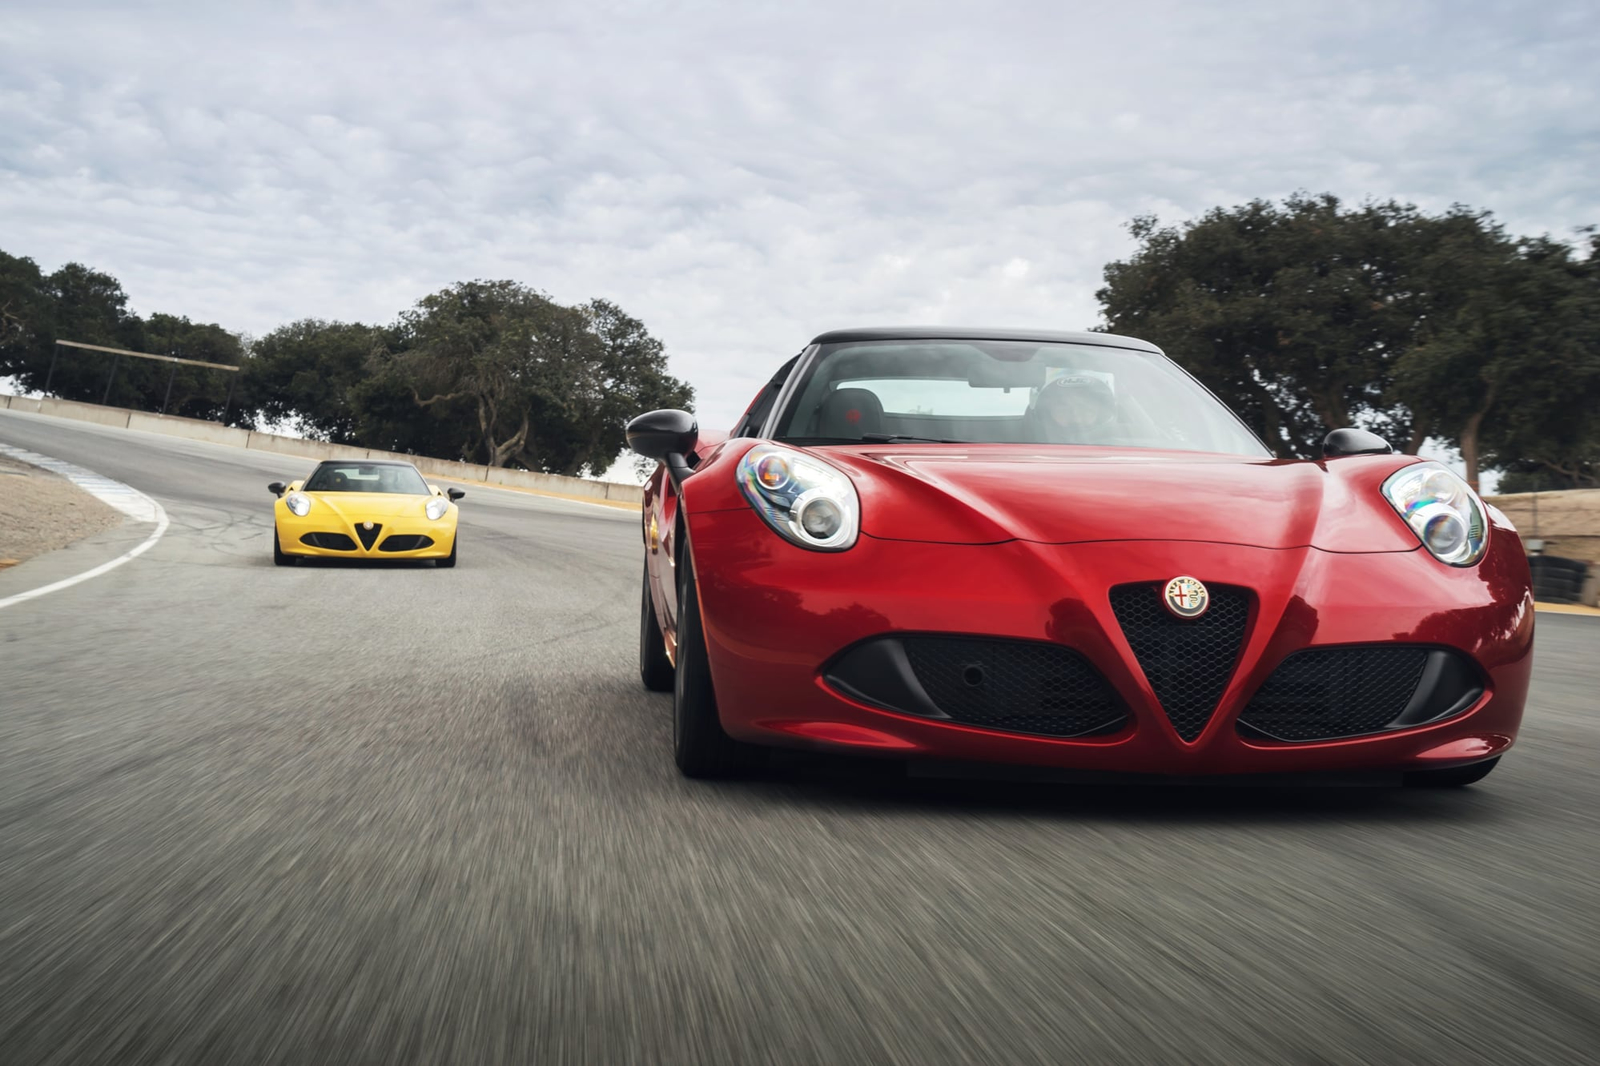 video, special editions, one-off alfa romeo 4c special edition coming to celebrate 10th anniversary